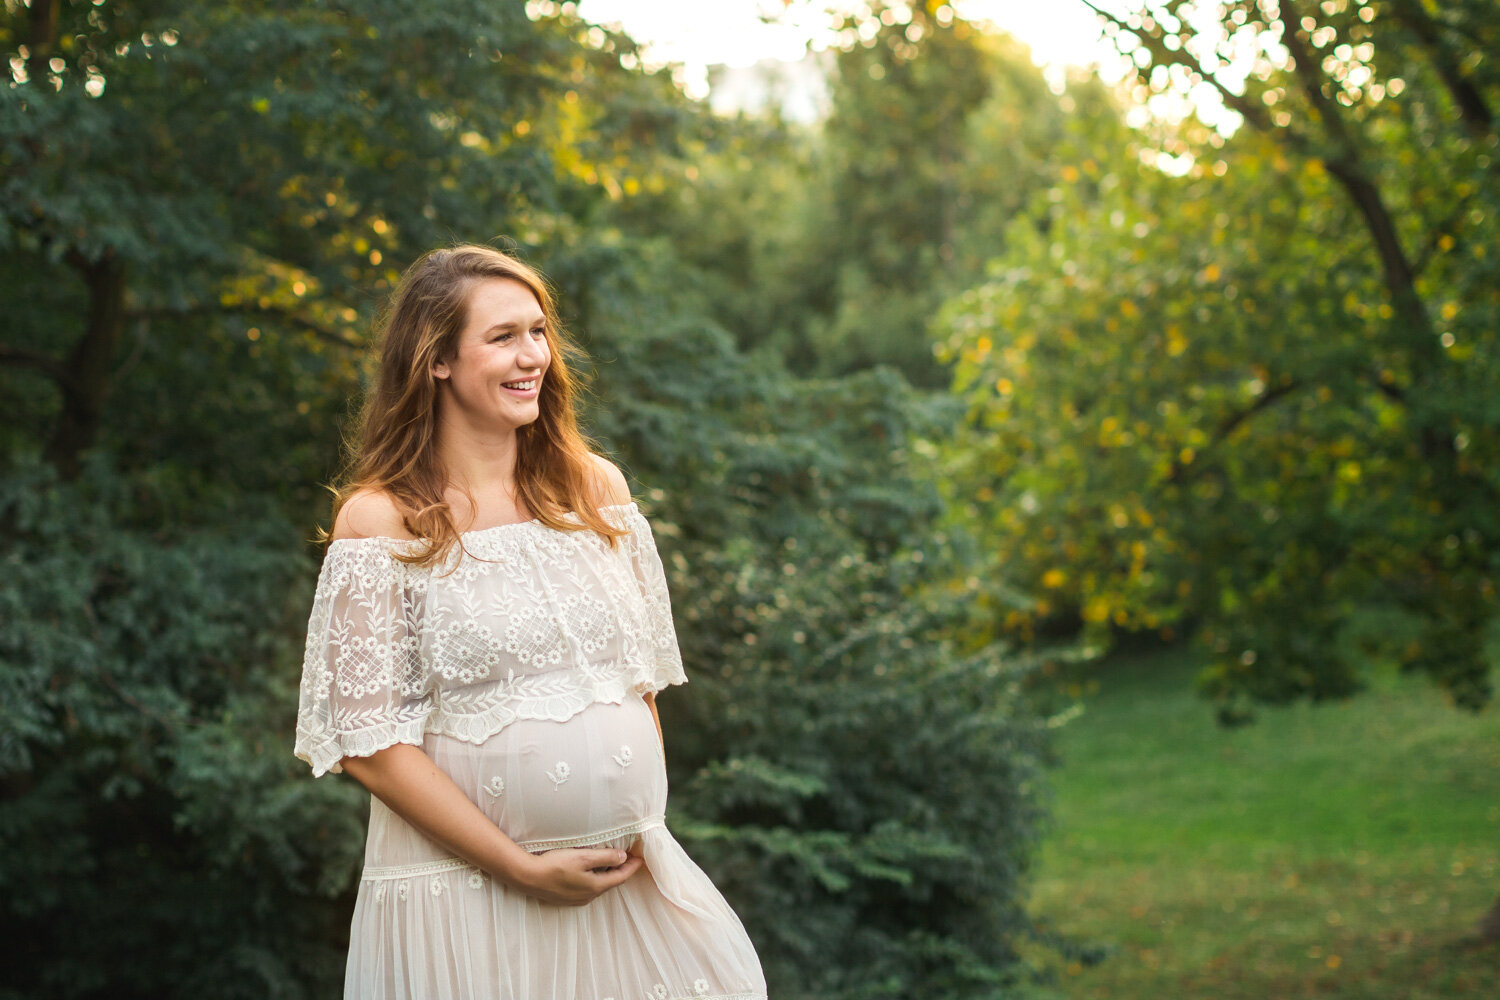 Central_Park_Maternity_Session_with_NYC_Baby_Photographer_Nicole_Hawkins_Photography_September_2019_Lara-11.jpg